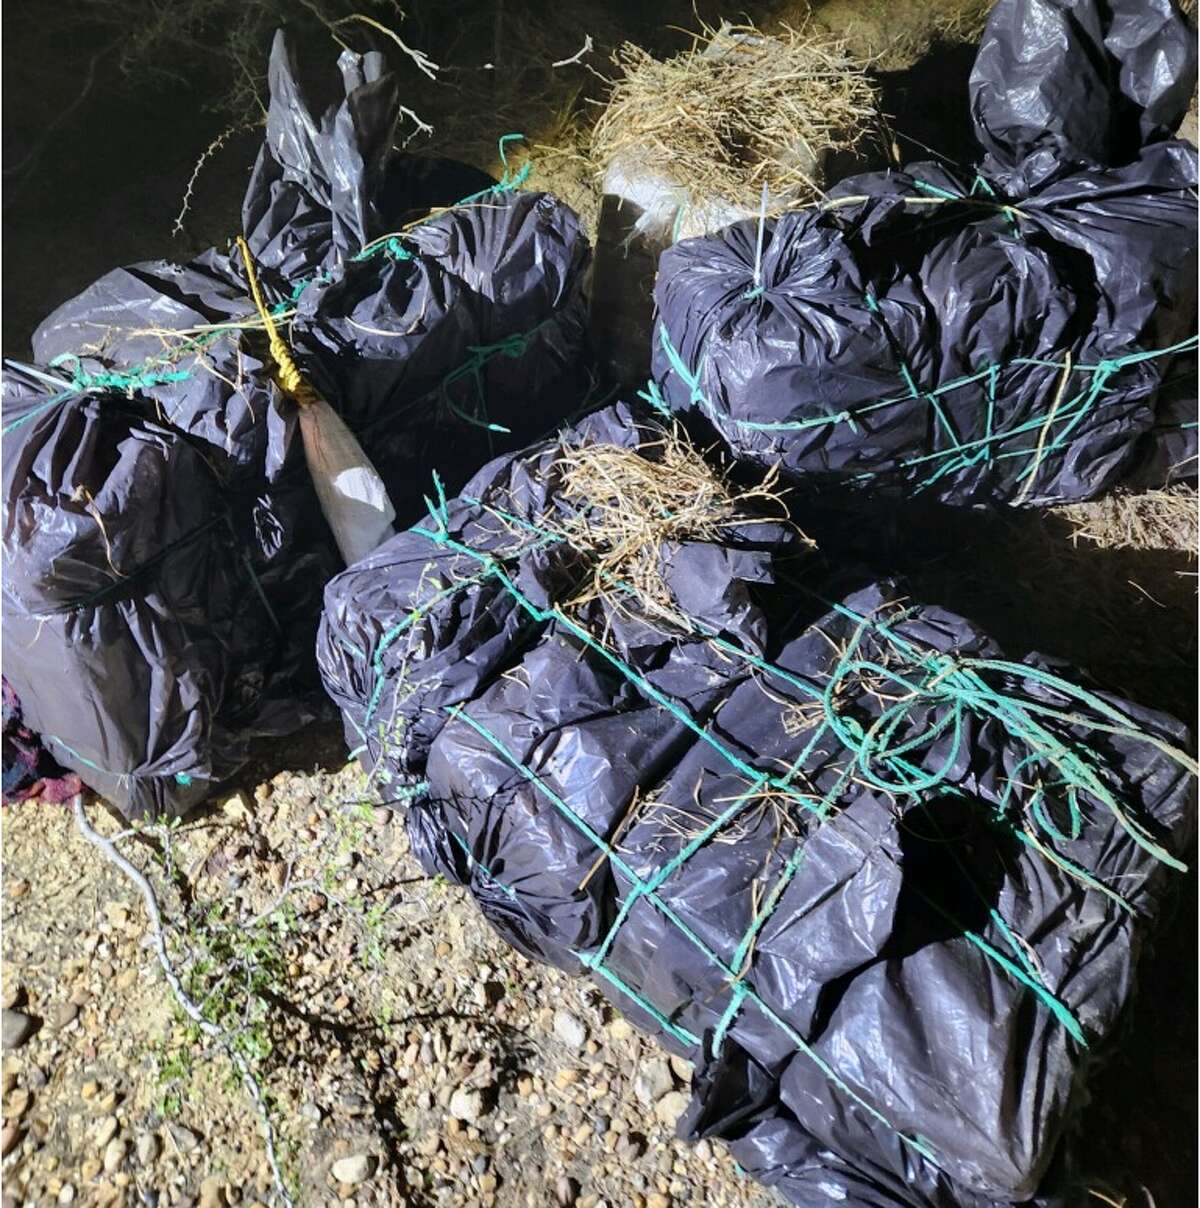 U.S. Border Patrol agents in Zapata County seized 317 pounds of marijuana valued at more than $250,000.